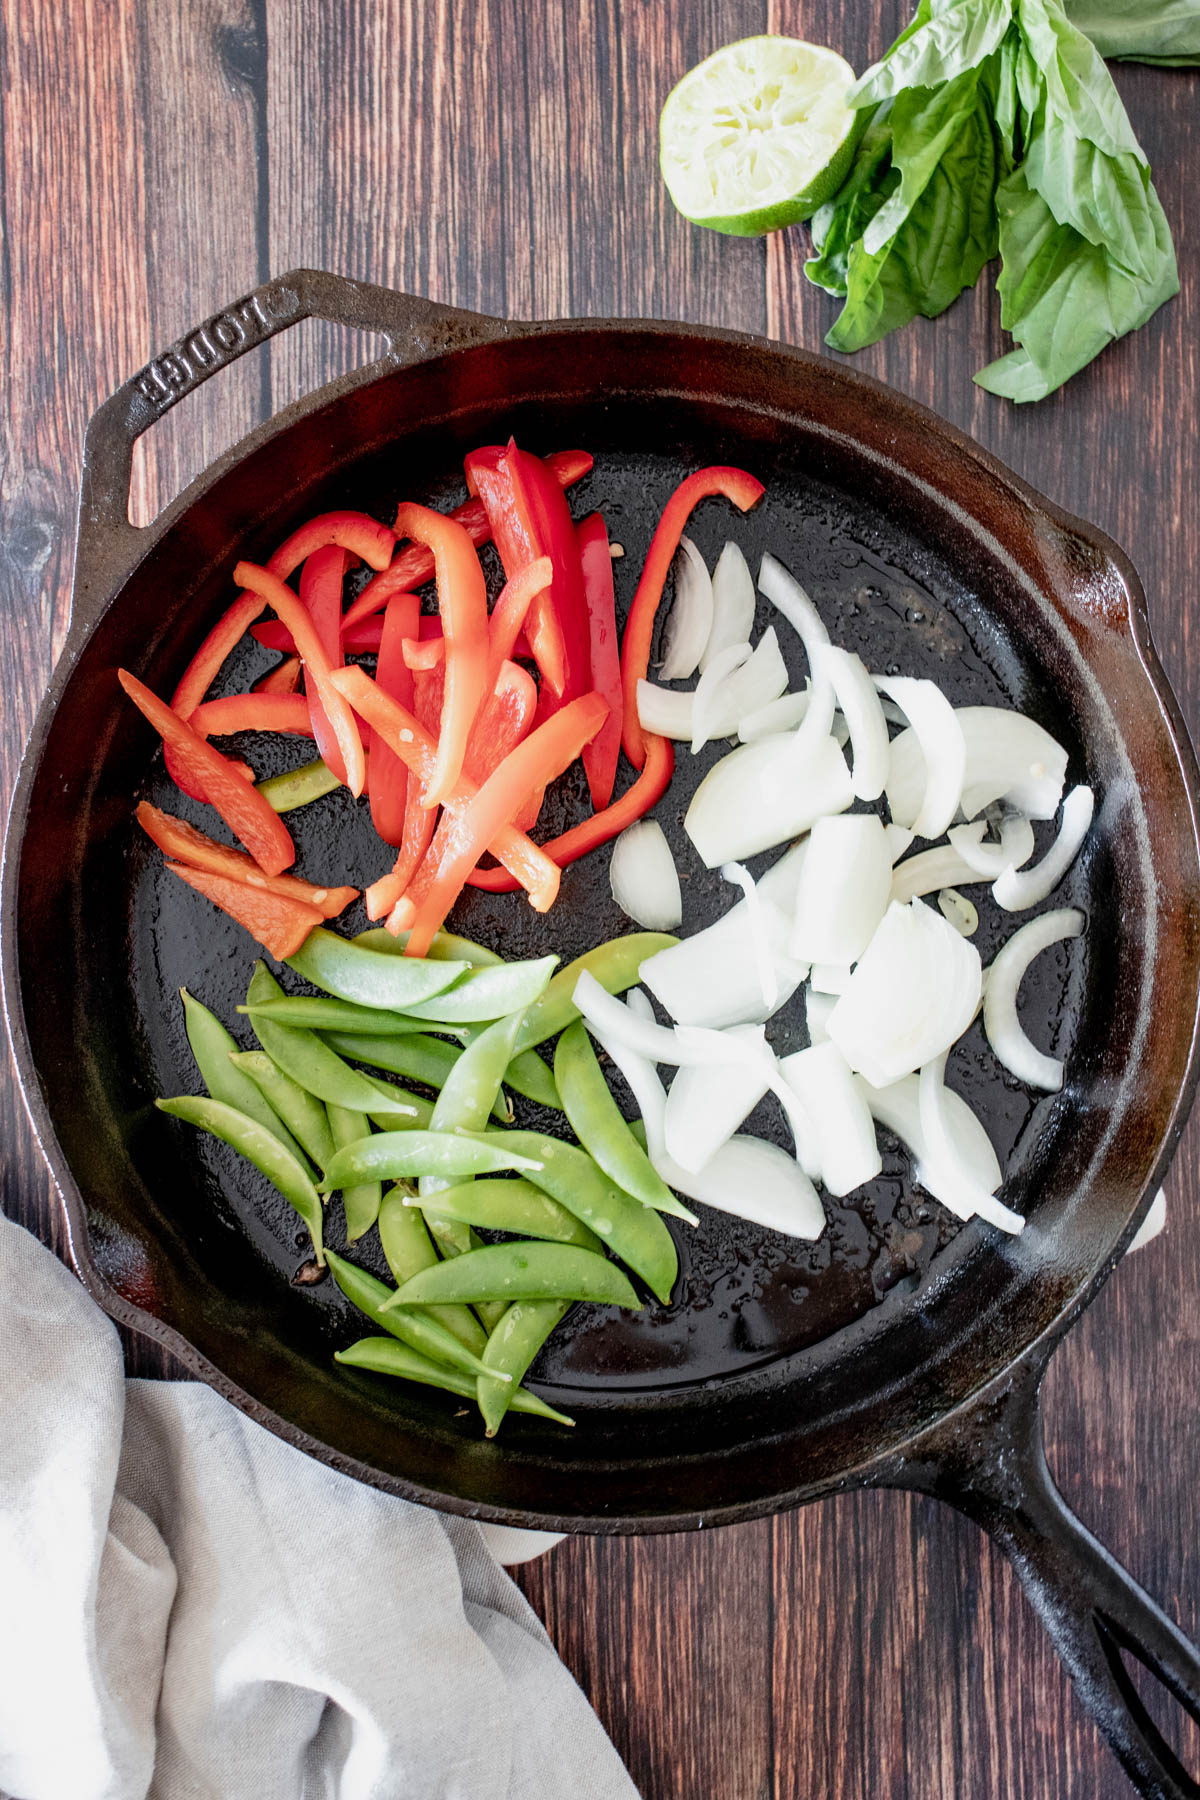 Sliced onion, red bell peppers and snow peas in a skillet before cooking. 